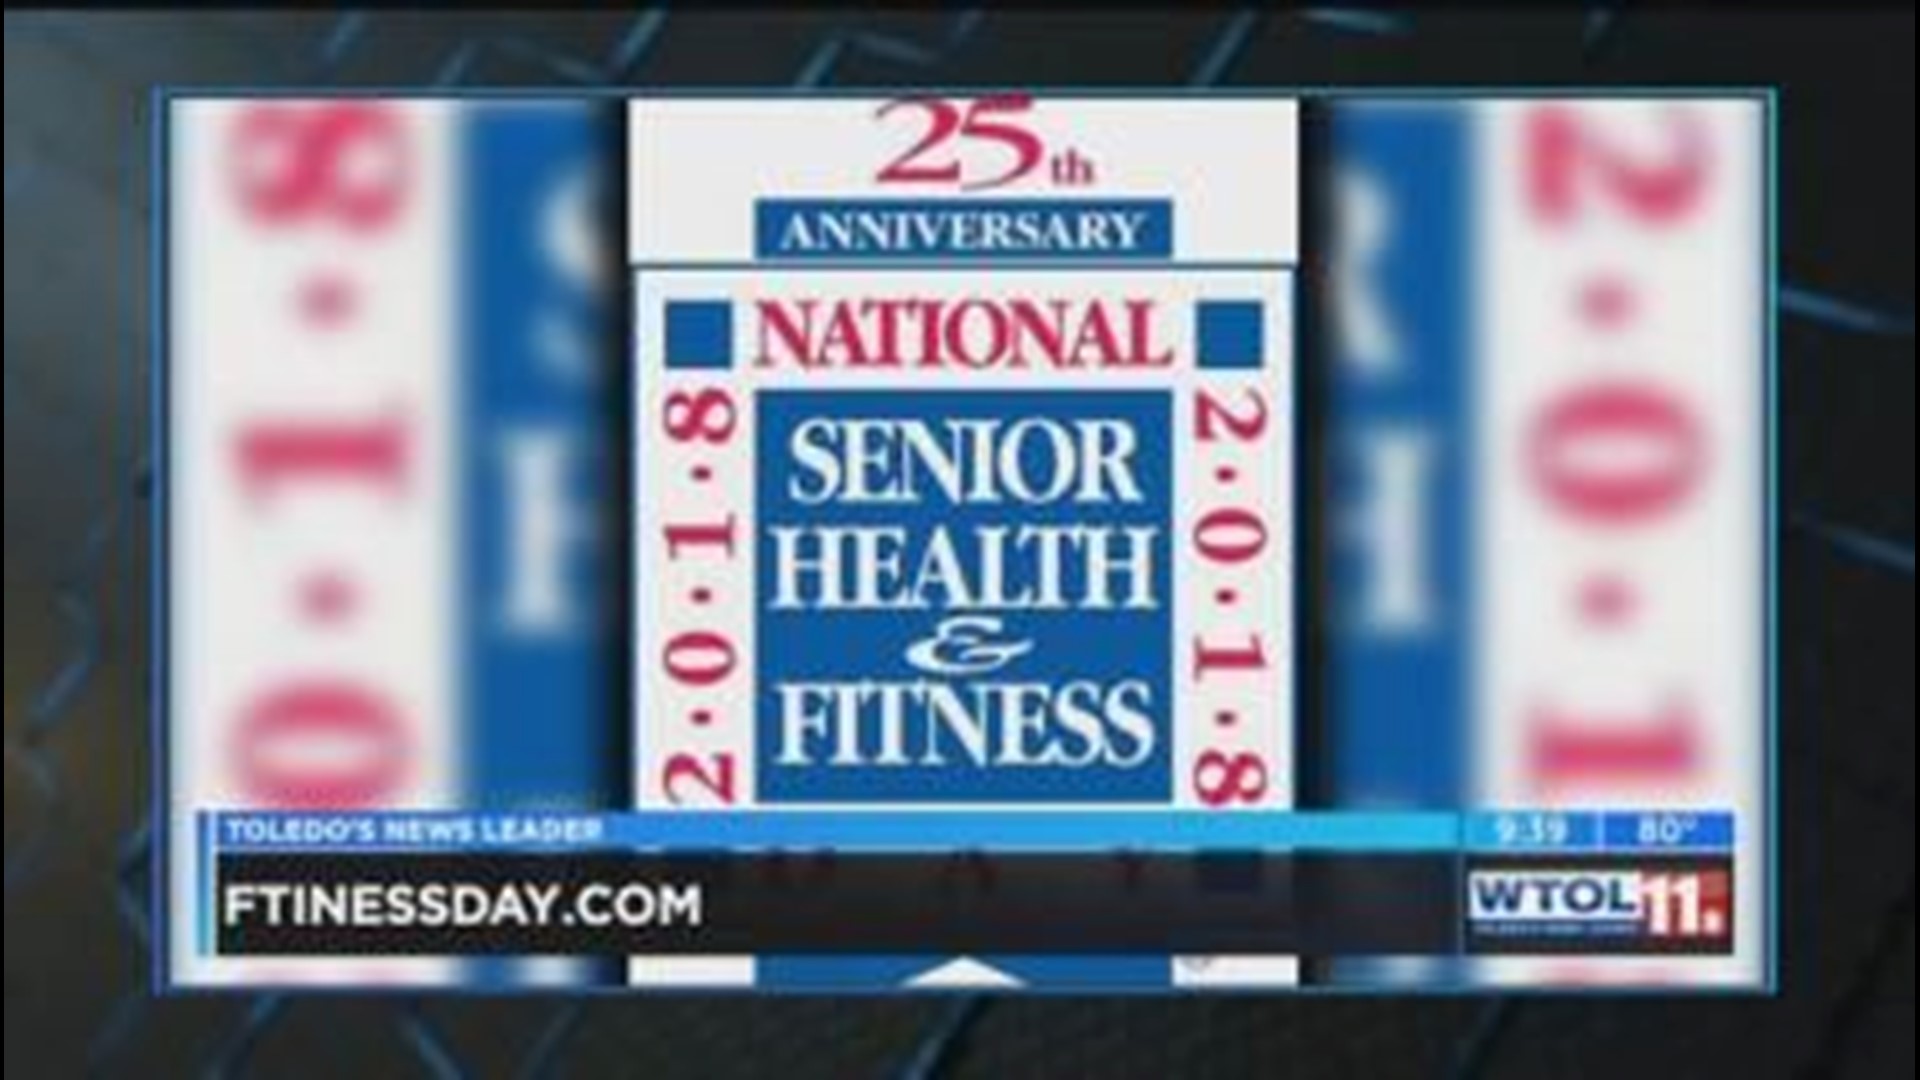 National Senior Fitness Day reminds us its important to stay healthy regardless of age